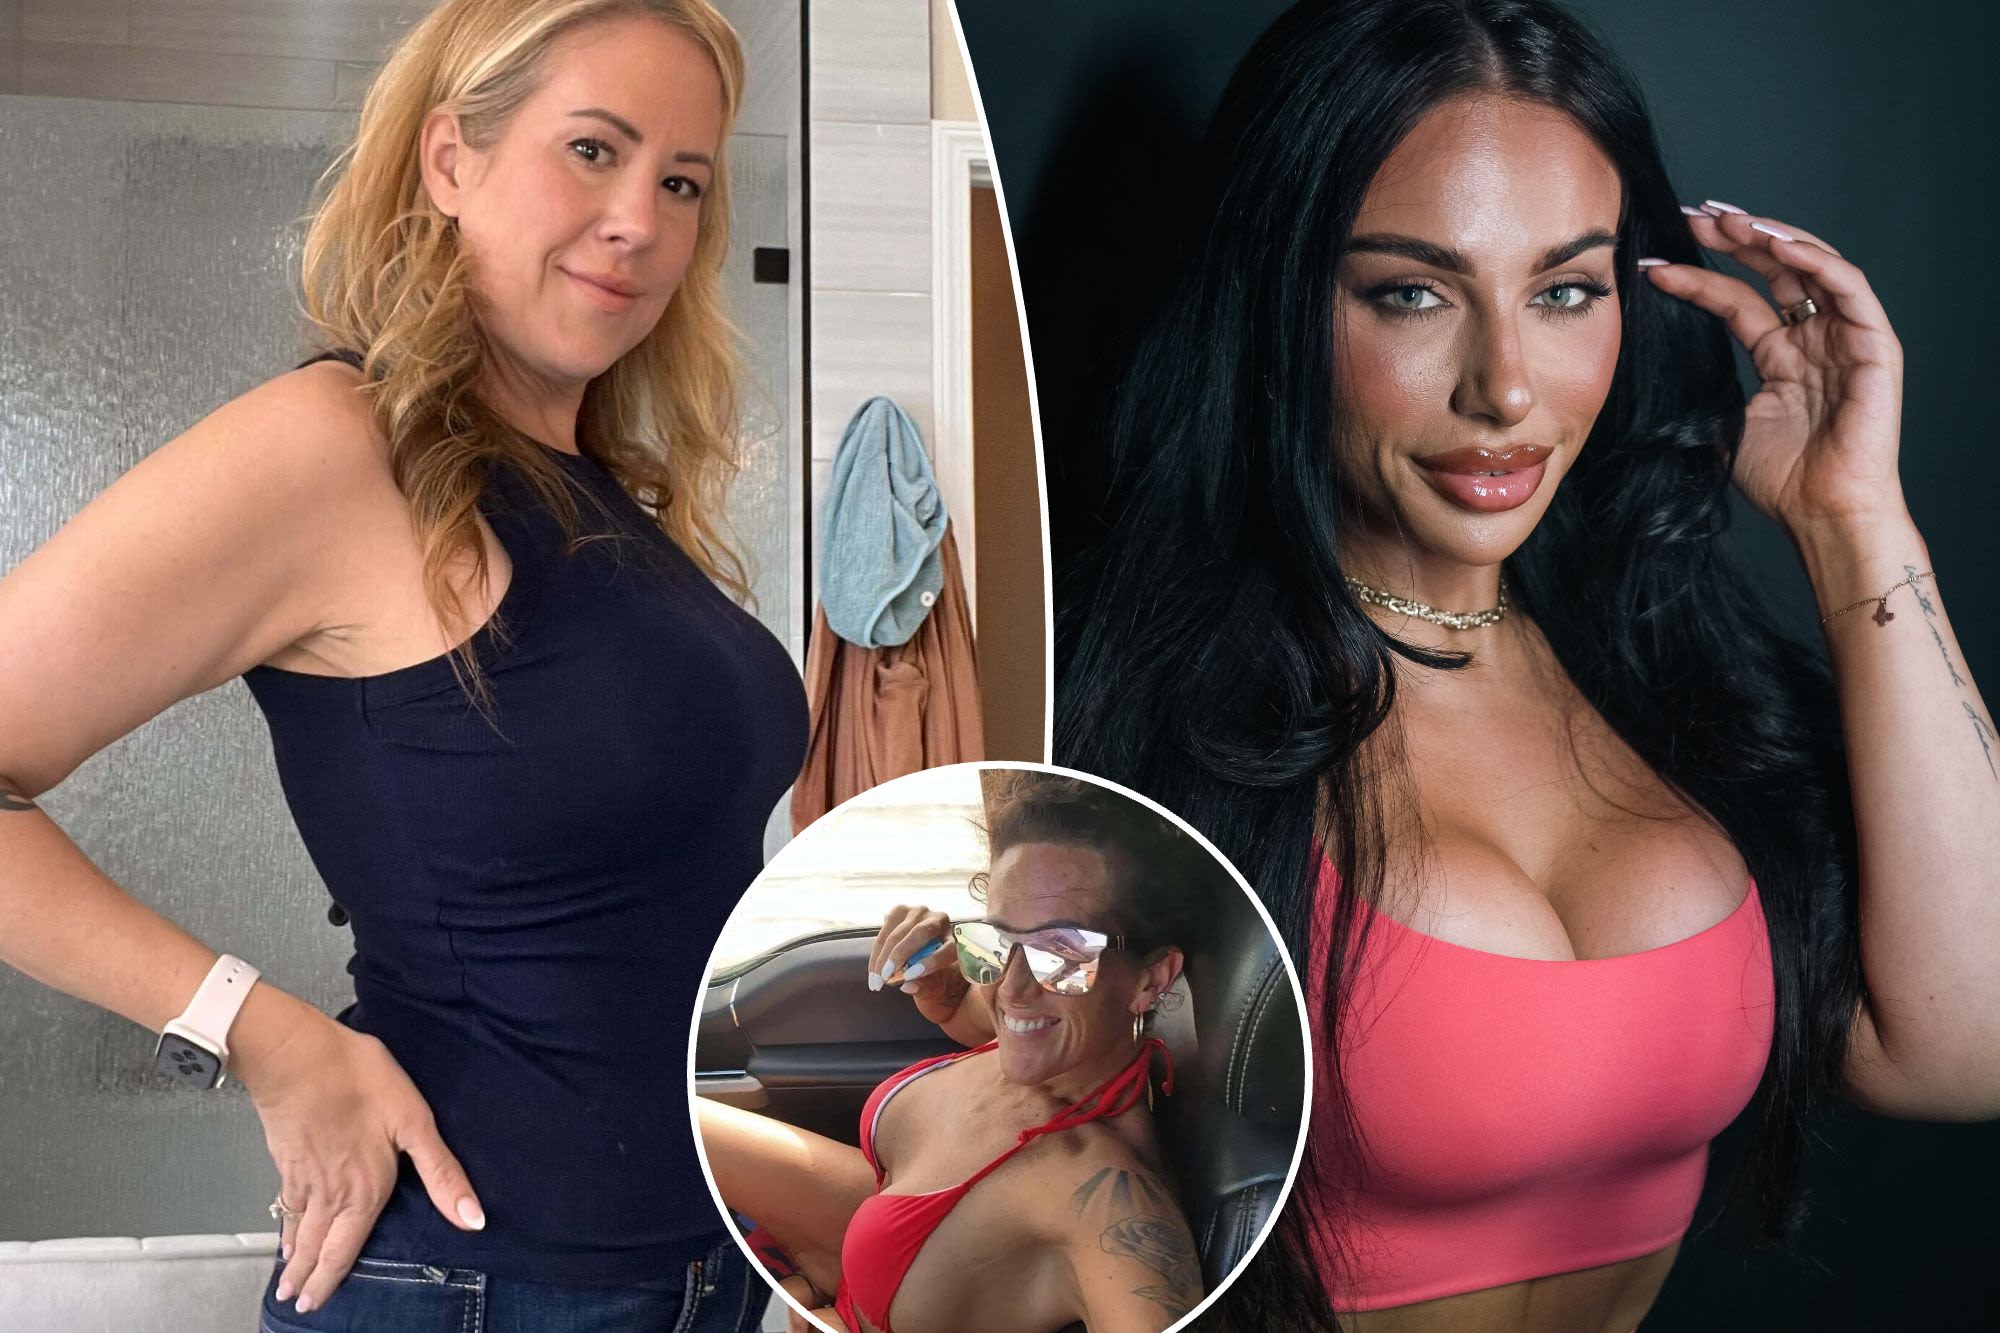 Women are celebrating their Ozempic weight loss — by getting boob jobs: ‘Best decision I ever made’